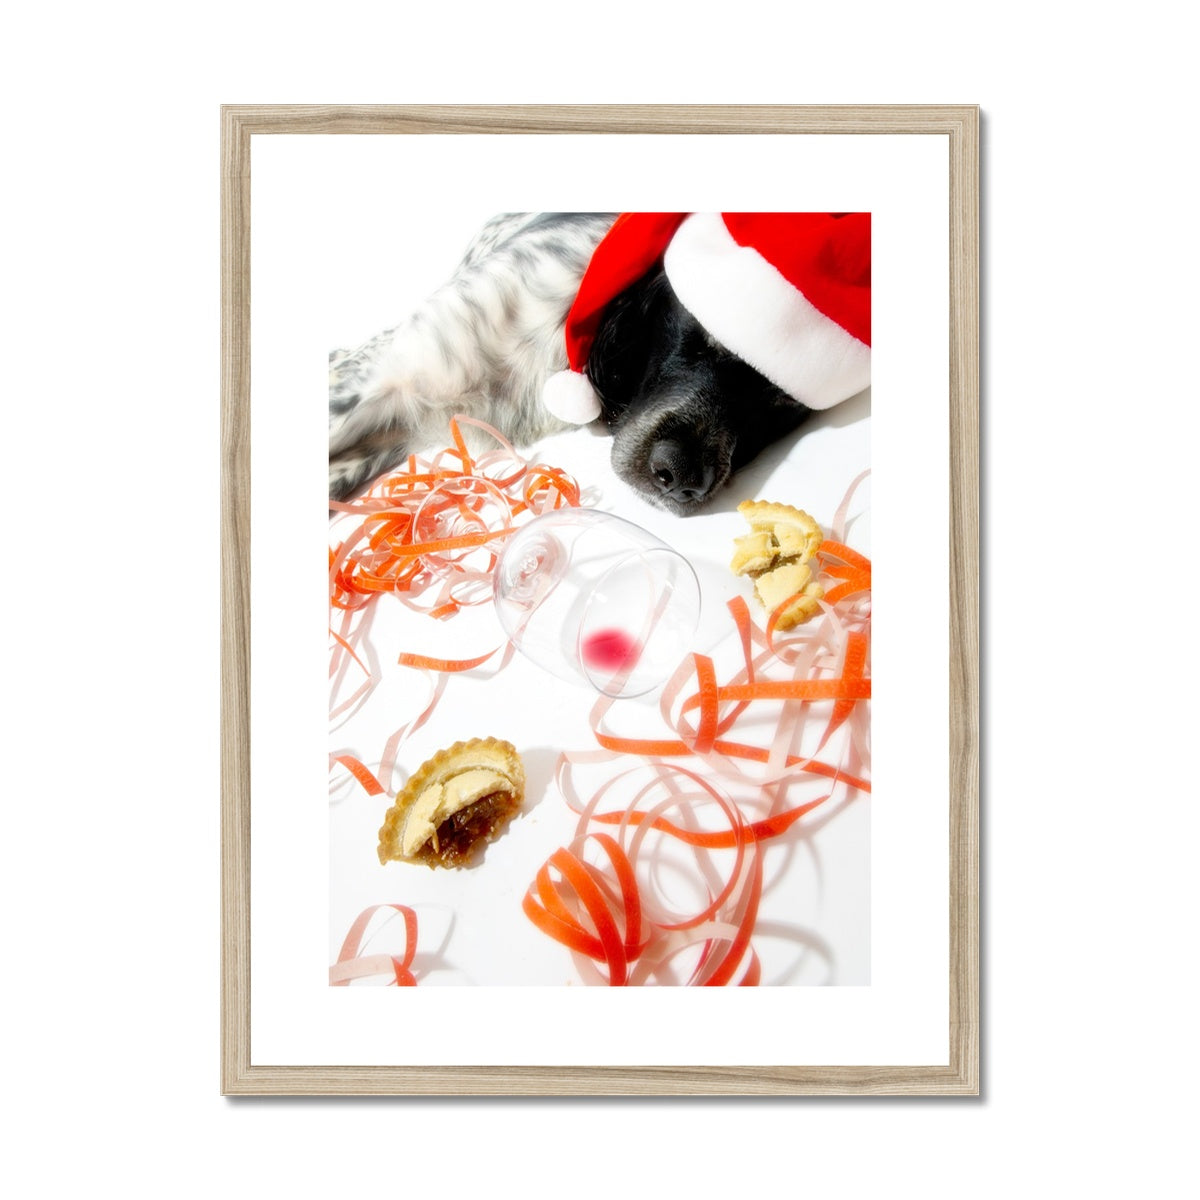 Sleeping dog after Christmas party Framed & Mounted Print